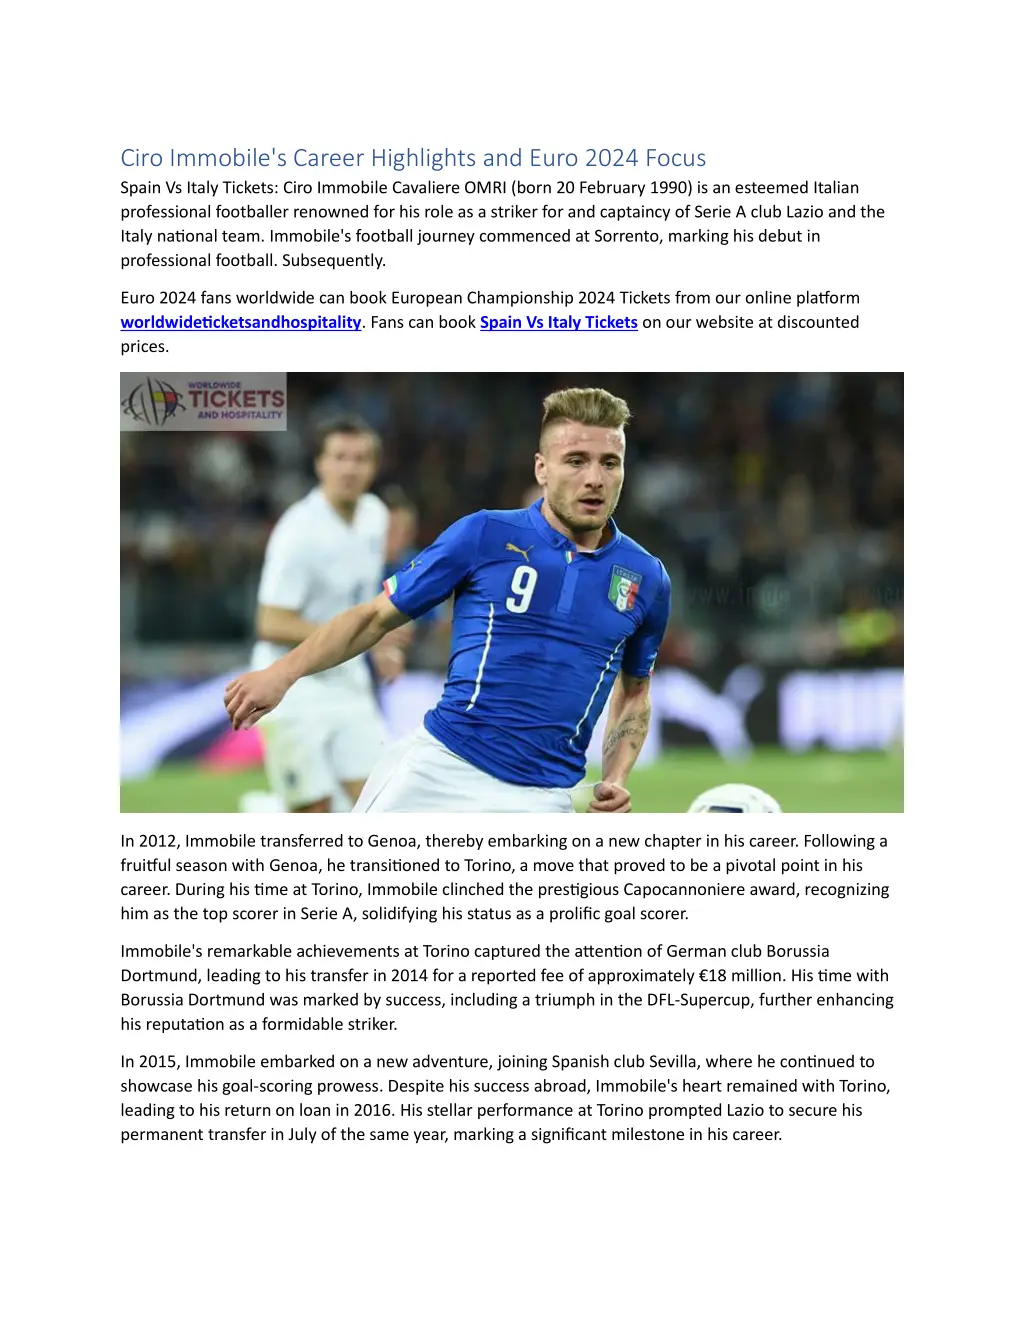 PPT Ciro Immobile's Career Highlights and Euro 2024 Focus